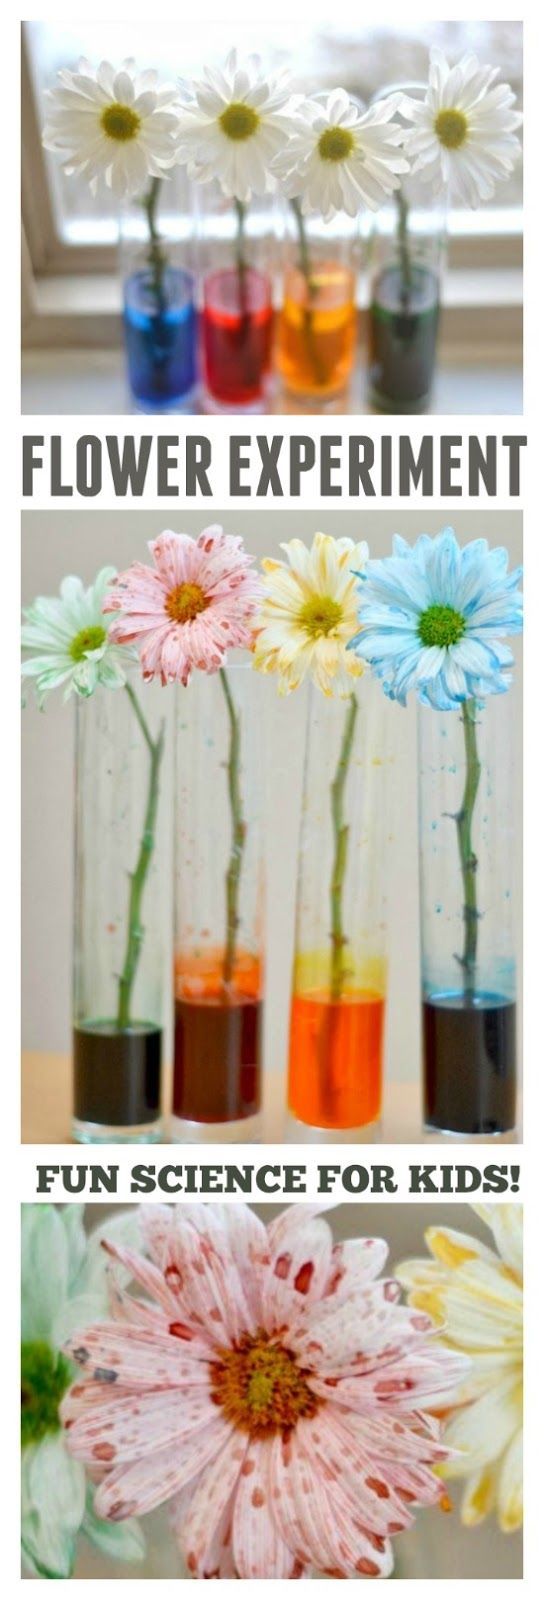 Over 15 Awesome Boredom Buster Fun Science Experiment Ideas to do With the Kids - perfect for summer, school and any day! They all look pretty easy to do with the kids. www.kidfriendlythingstodo.com